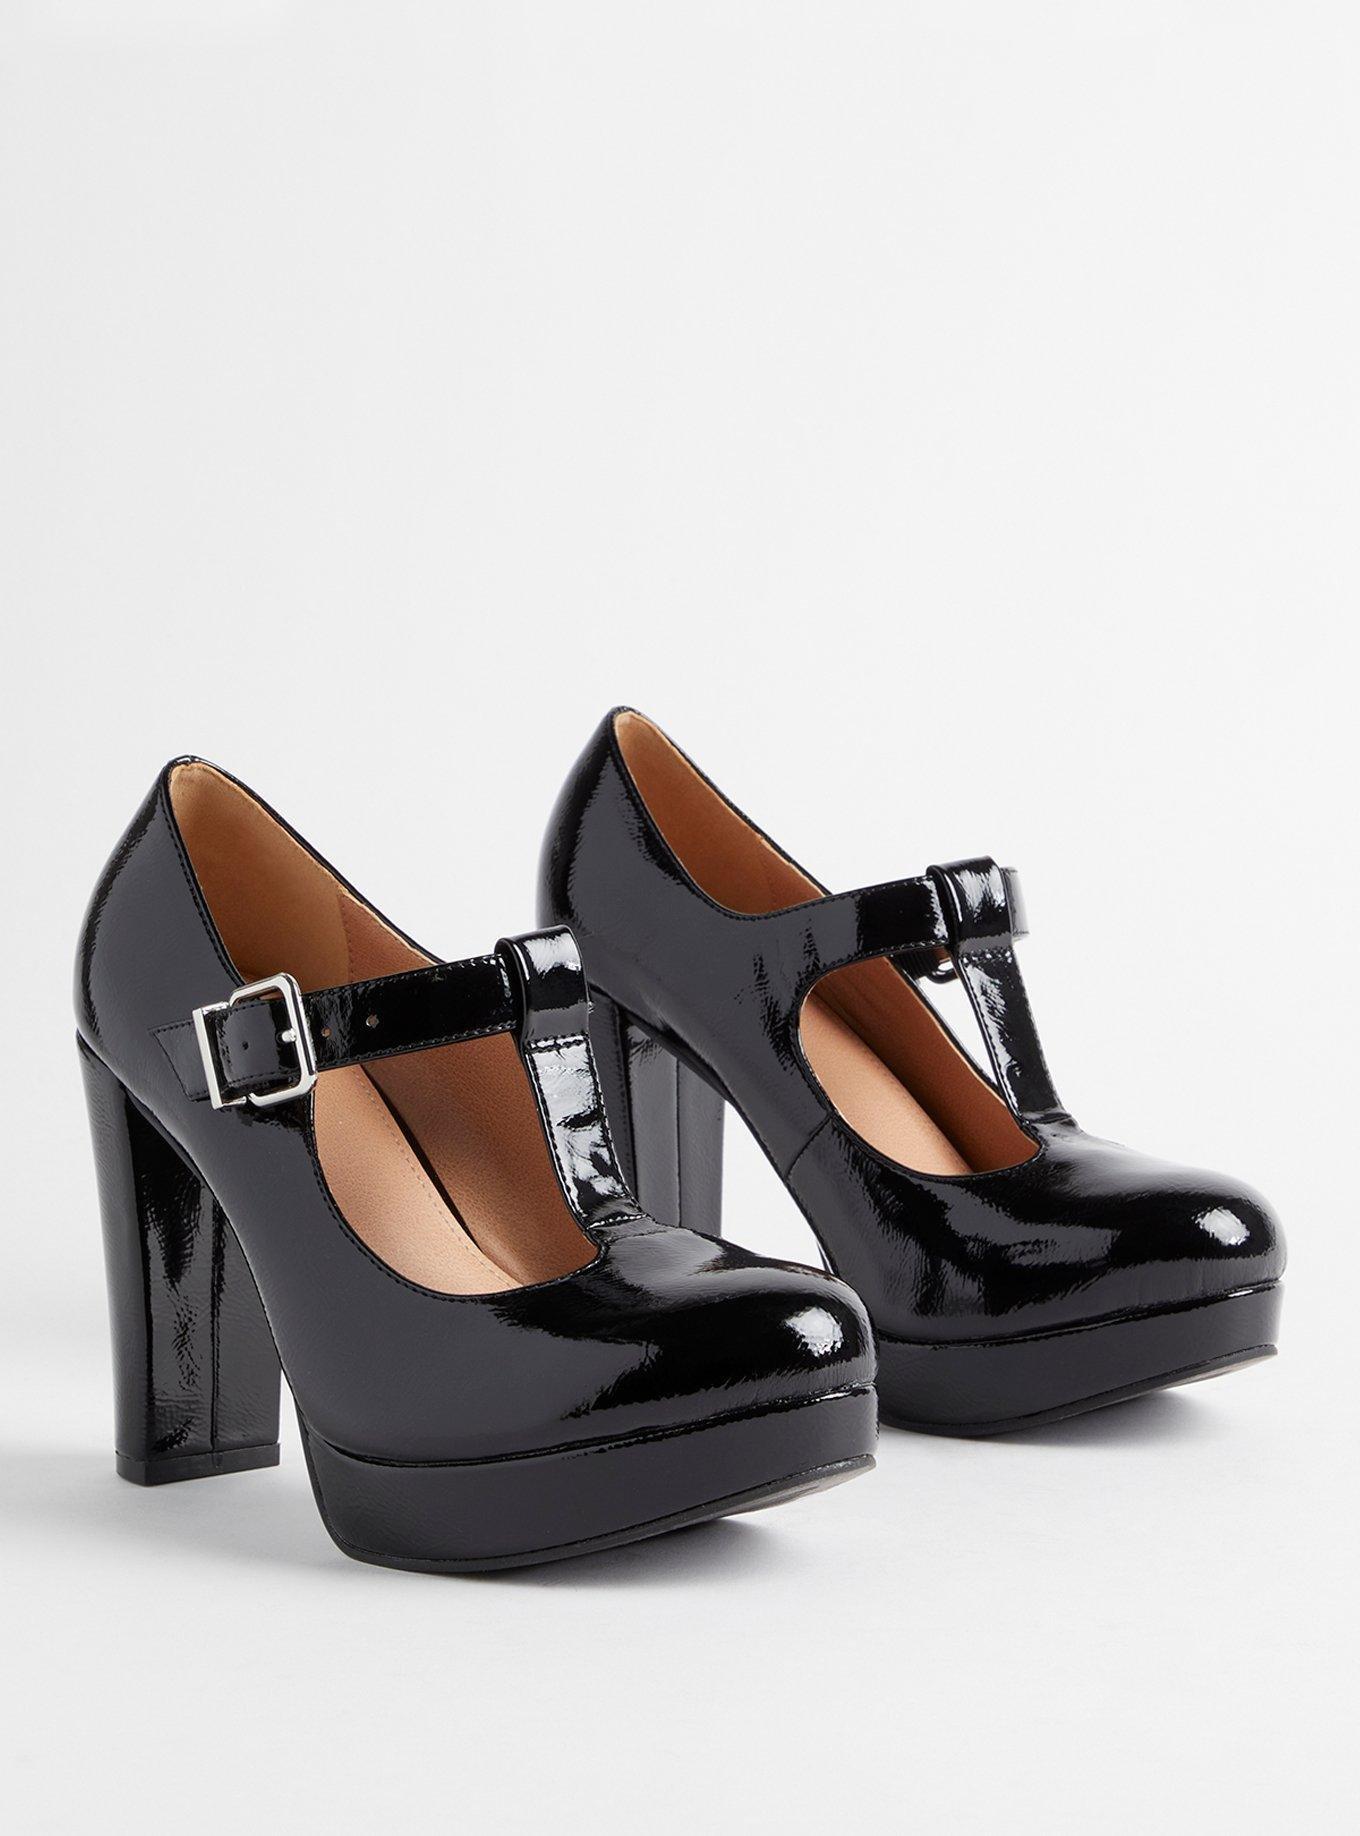 Patent T Strap Mary Jane Shoes